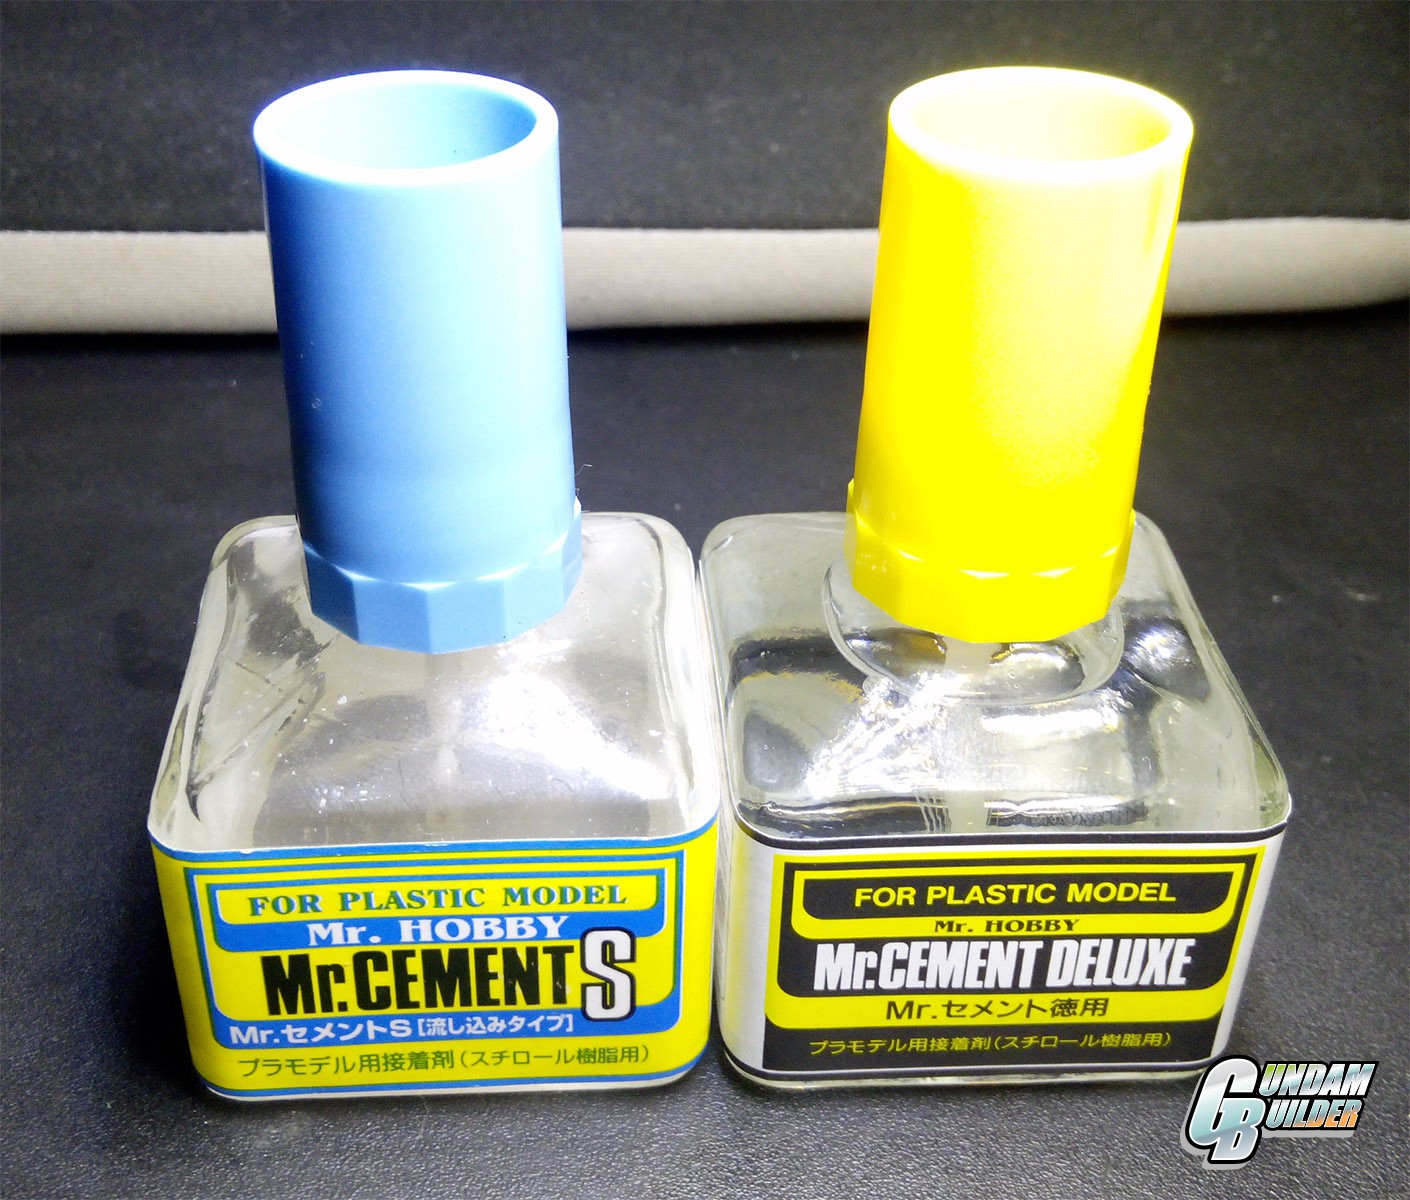 Art and Musings of a Miniature Hobbyist: Review of Mr.Cement S - A